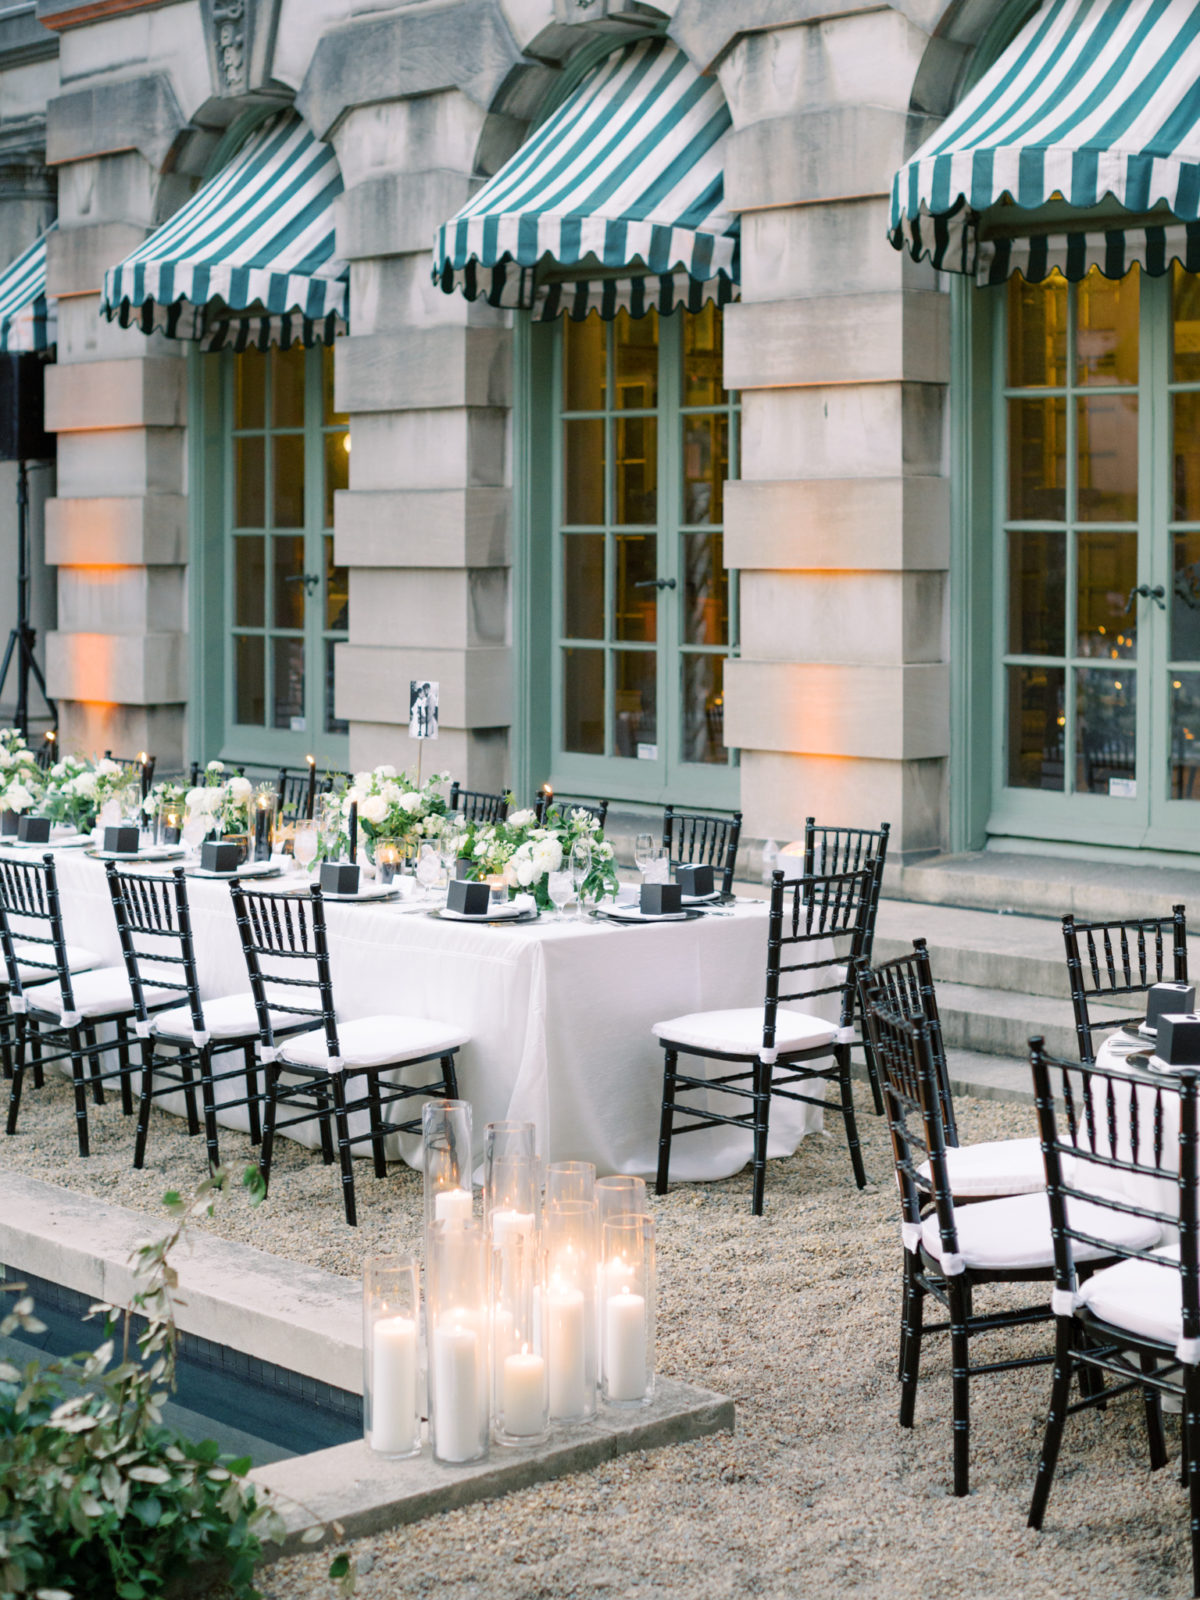 Anderson House wedding reception design by Simply Breathe Events.